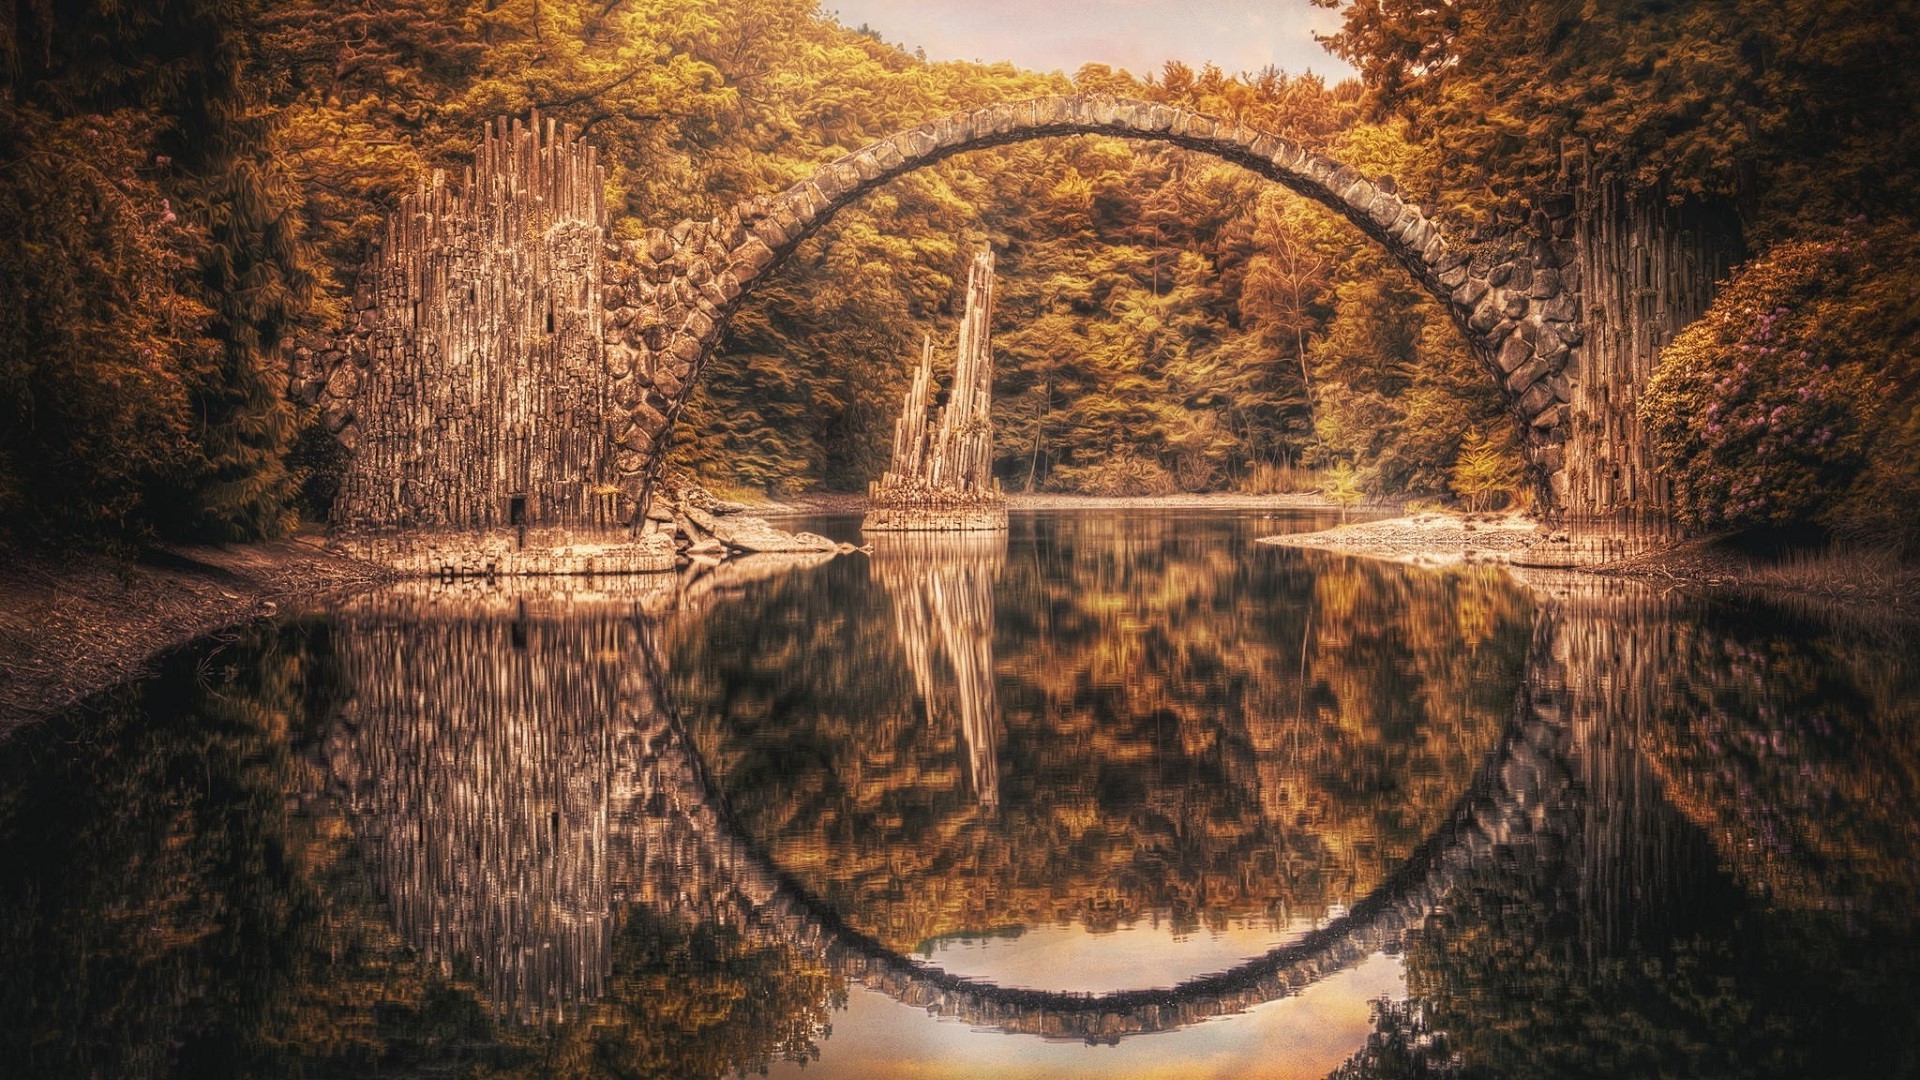 landscape, HDR, Reflection, Nature, Bridge, Rock Formation, Rock, Water, Calm, River, Fall, Trees, Forest Wallpaper